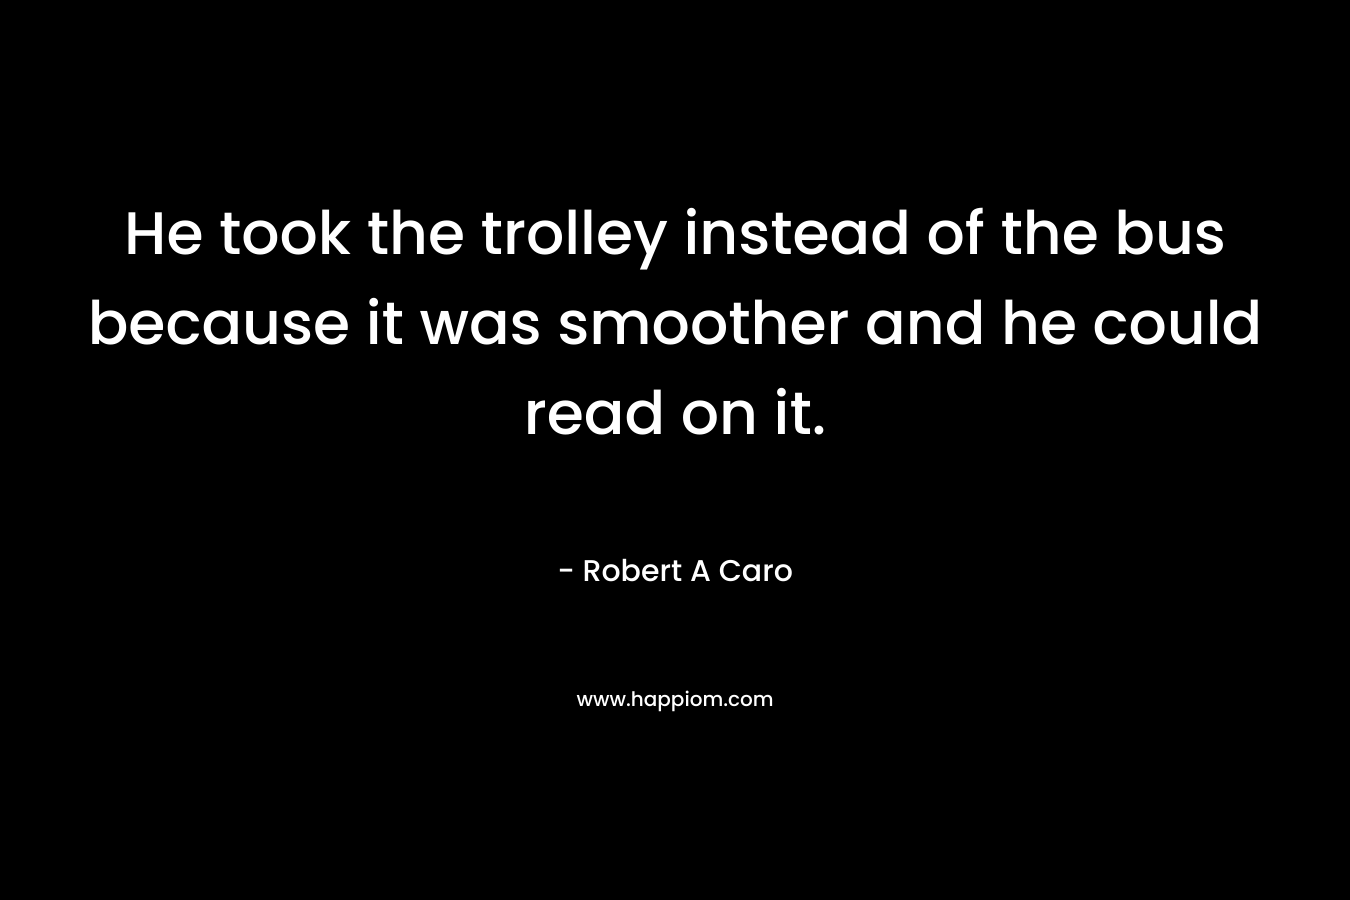 He took the trolley instead of the bus because it was smoother and he could read on it. – Robert A Caro